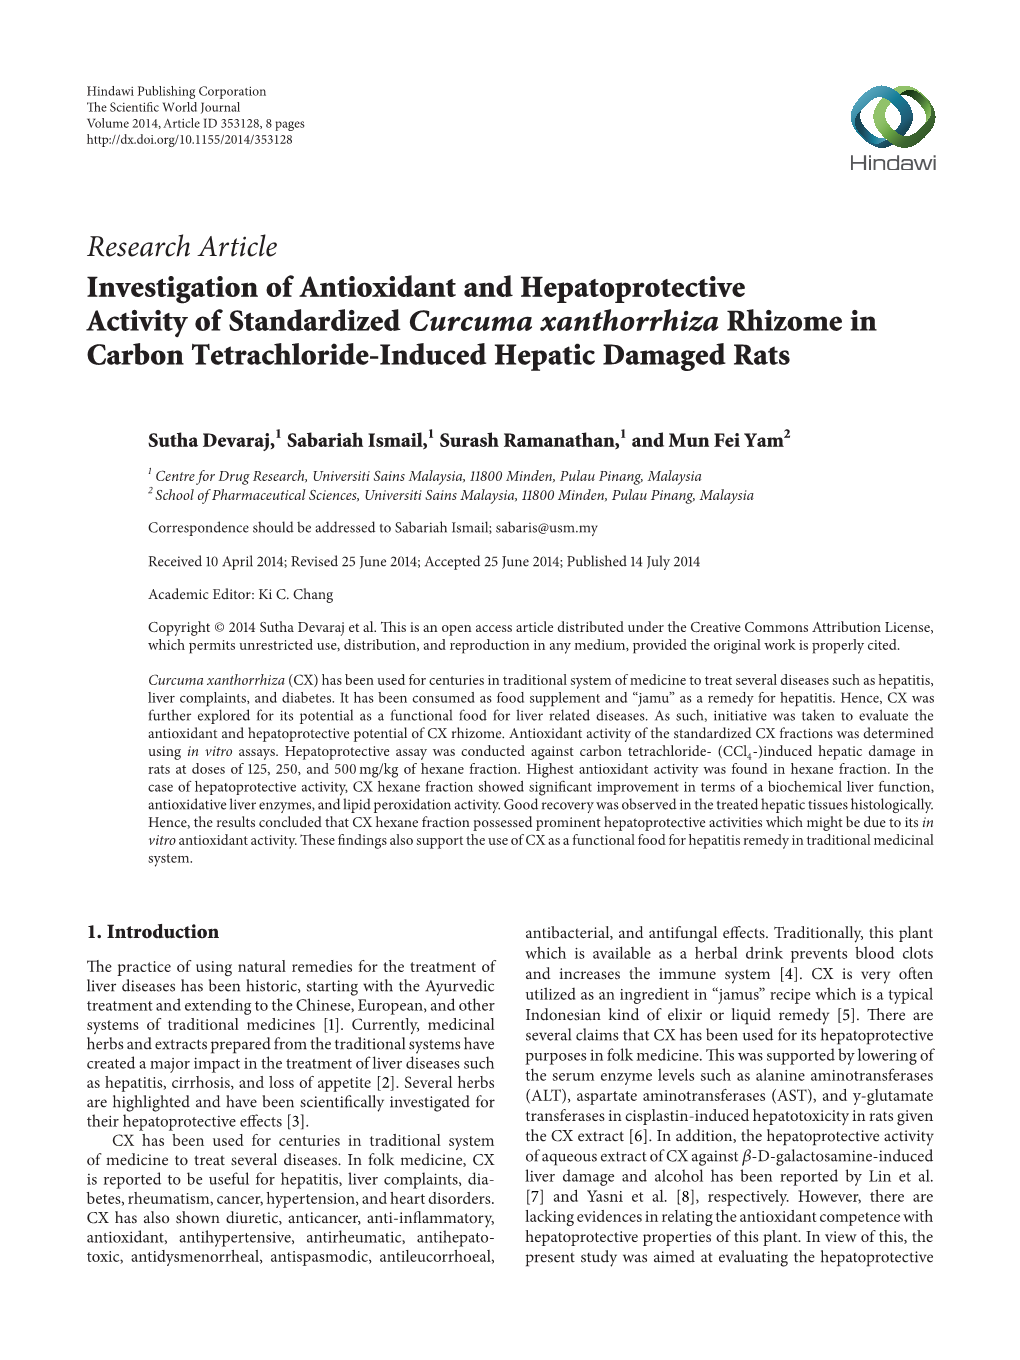 Investigation of Antioxidant and Hepatoprotective Activity of Standardized Curcuma Xanthorrhiza Rhizome in Carbon Tetrachloride-Induced Hepatic Damaged Rats